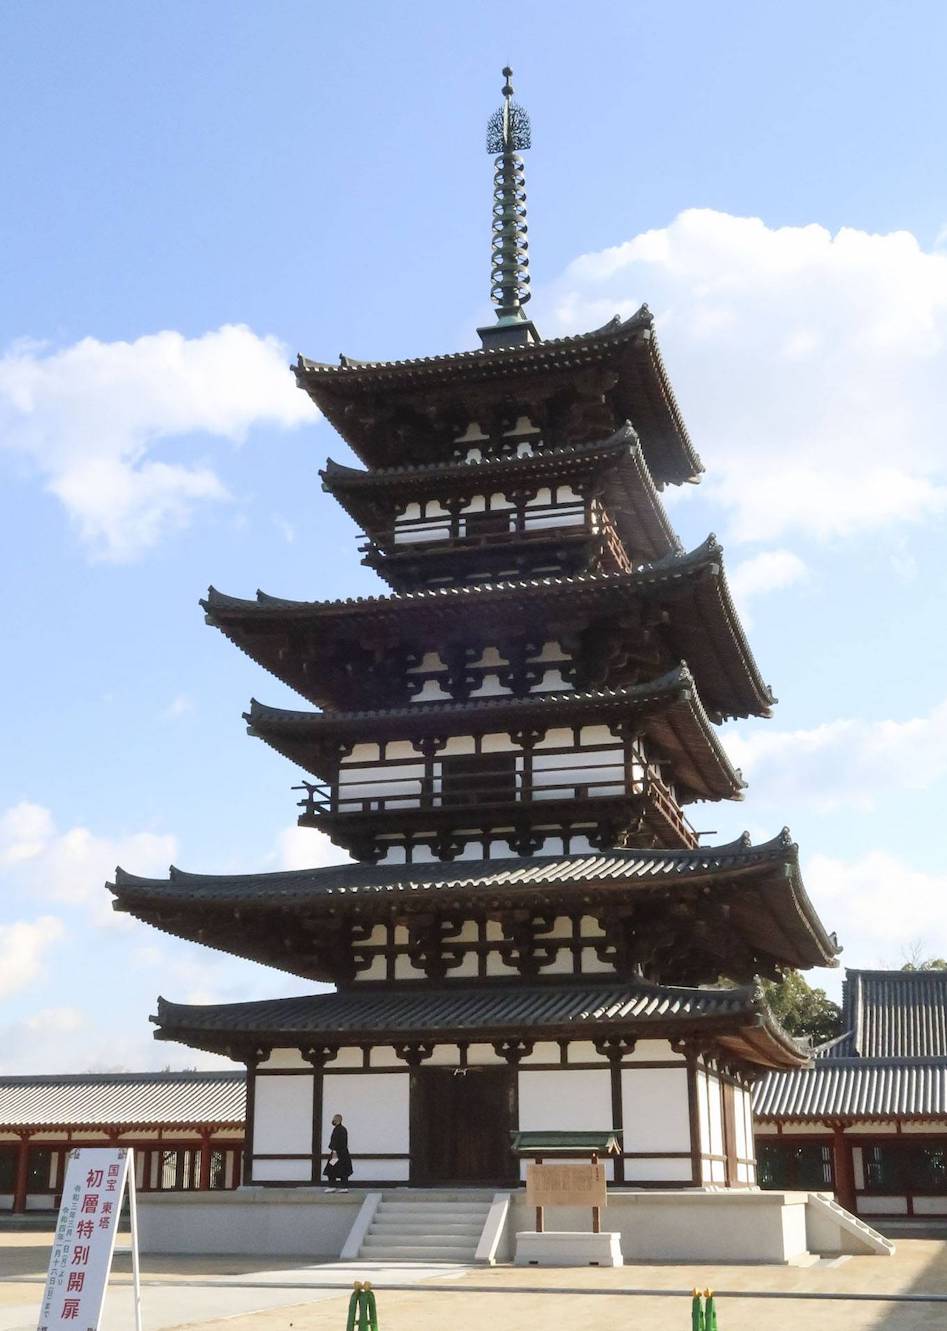 Japan to Open Ancient Buddhist Pagoda to the Public for the First Time